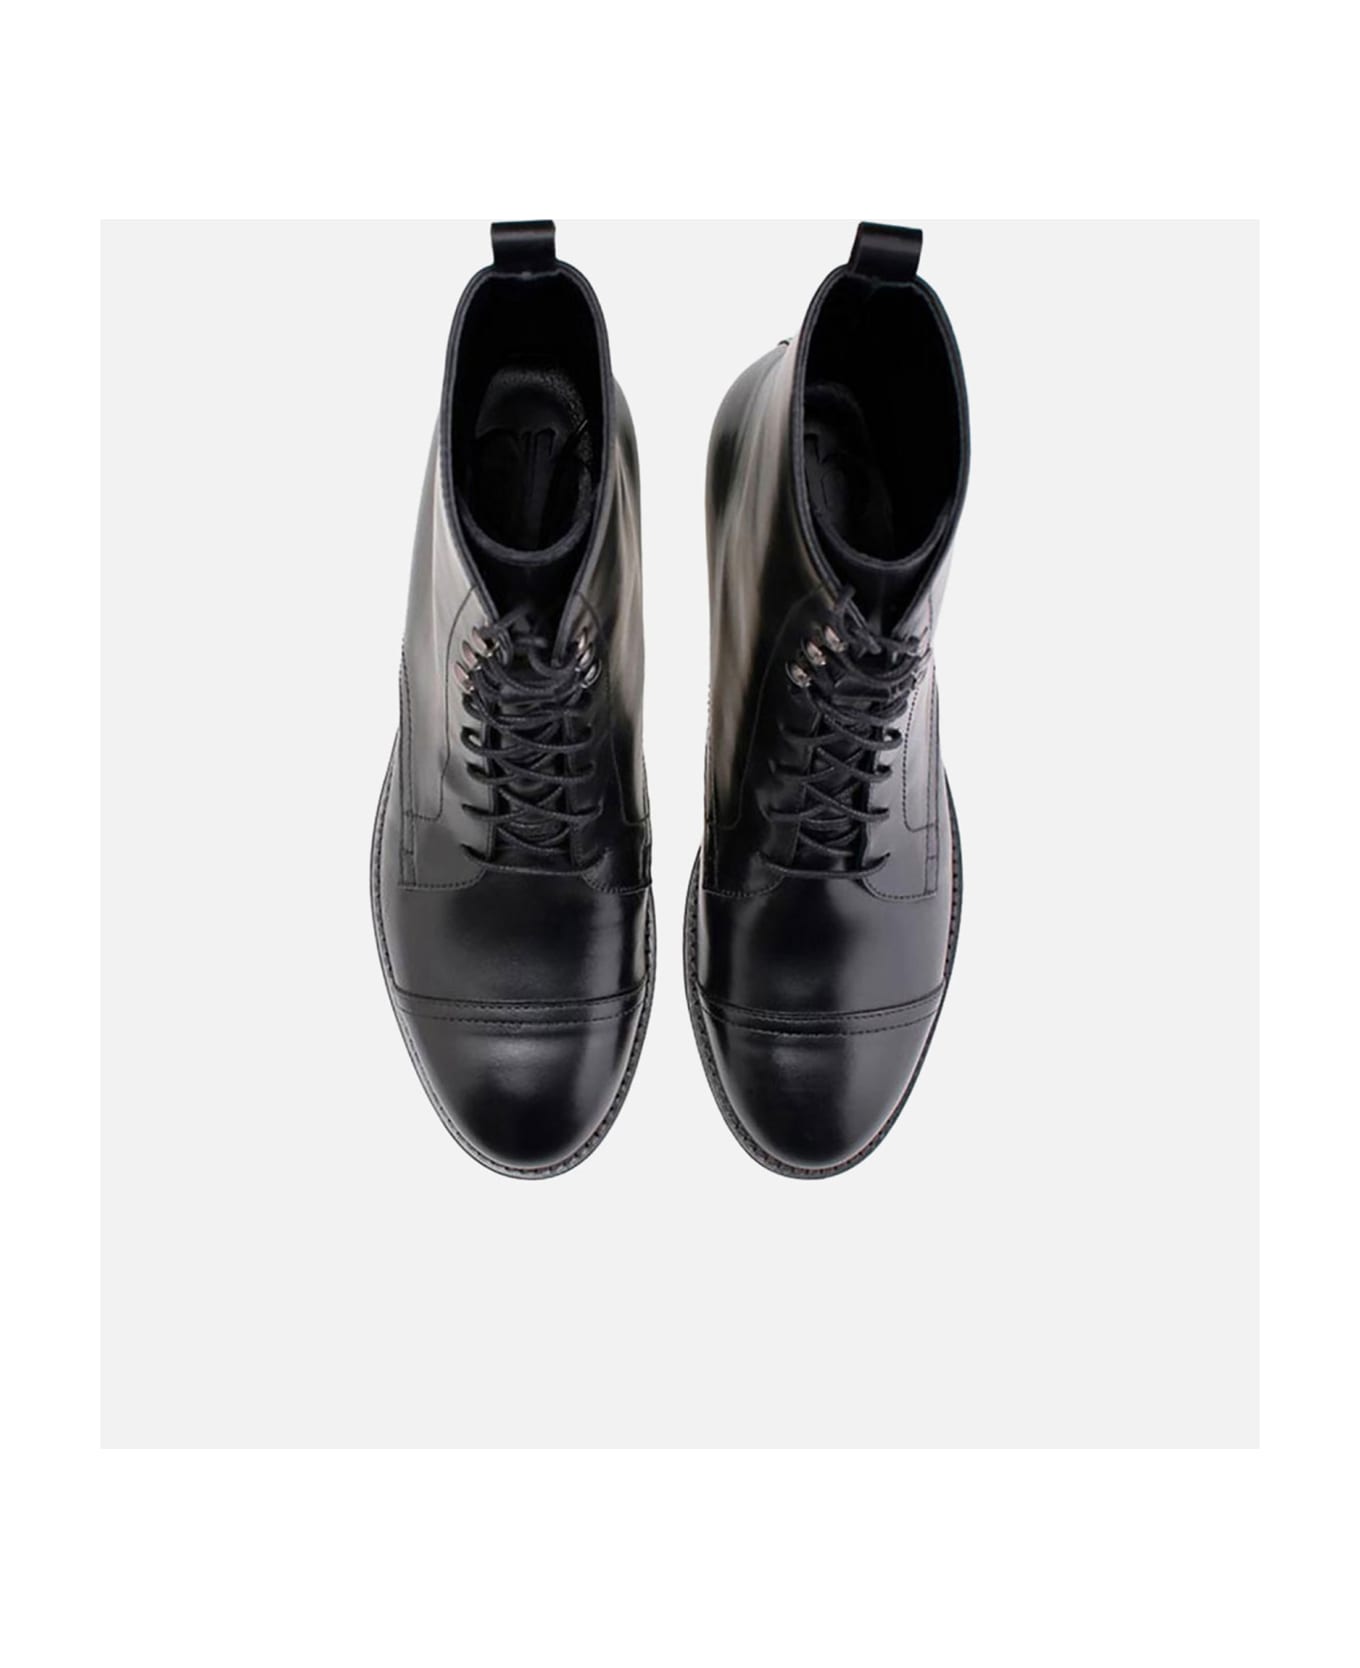 CB Made in Italy Leather Boots Eva - Black